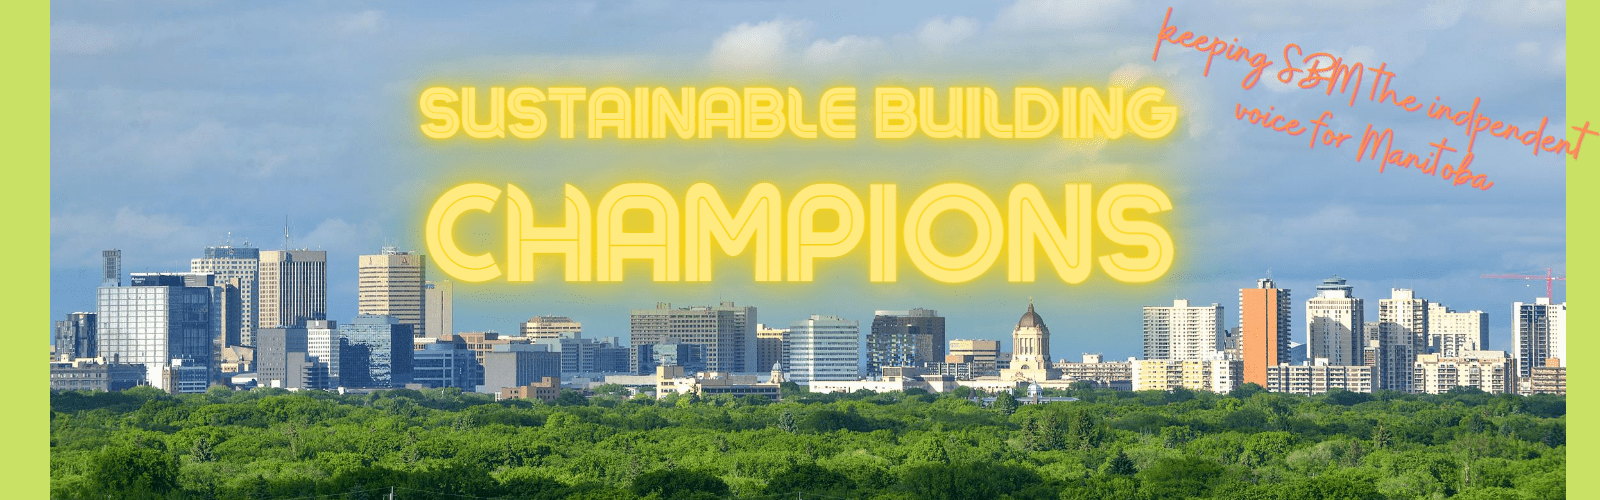 Sustainable Building Champions